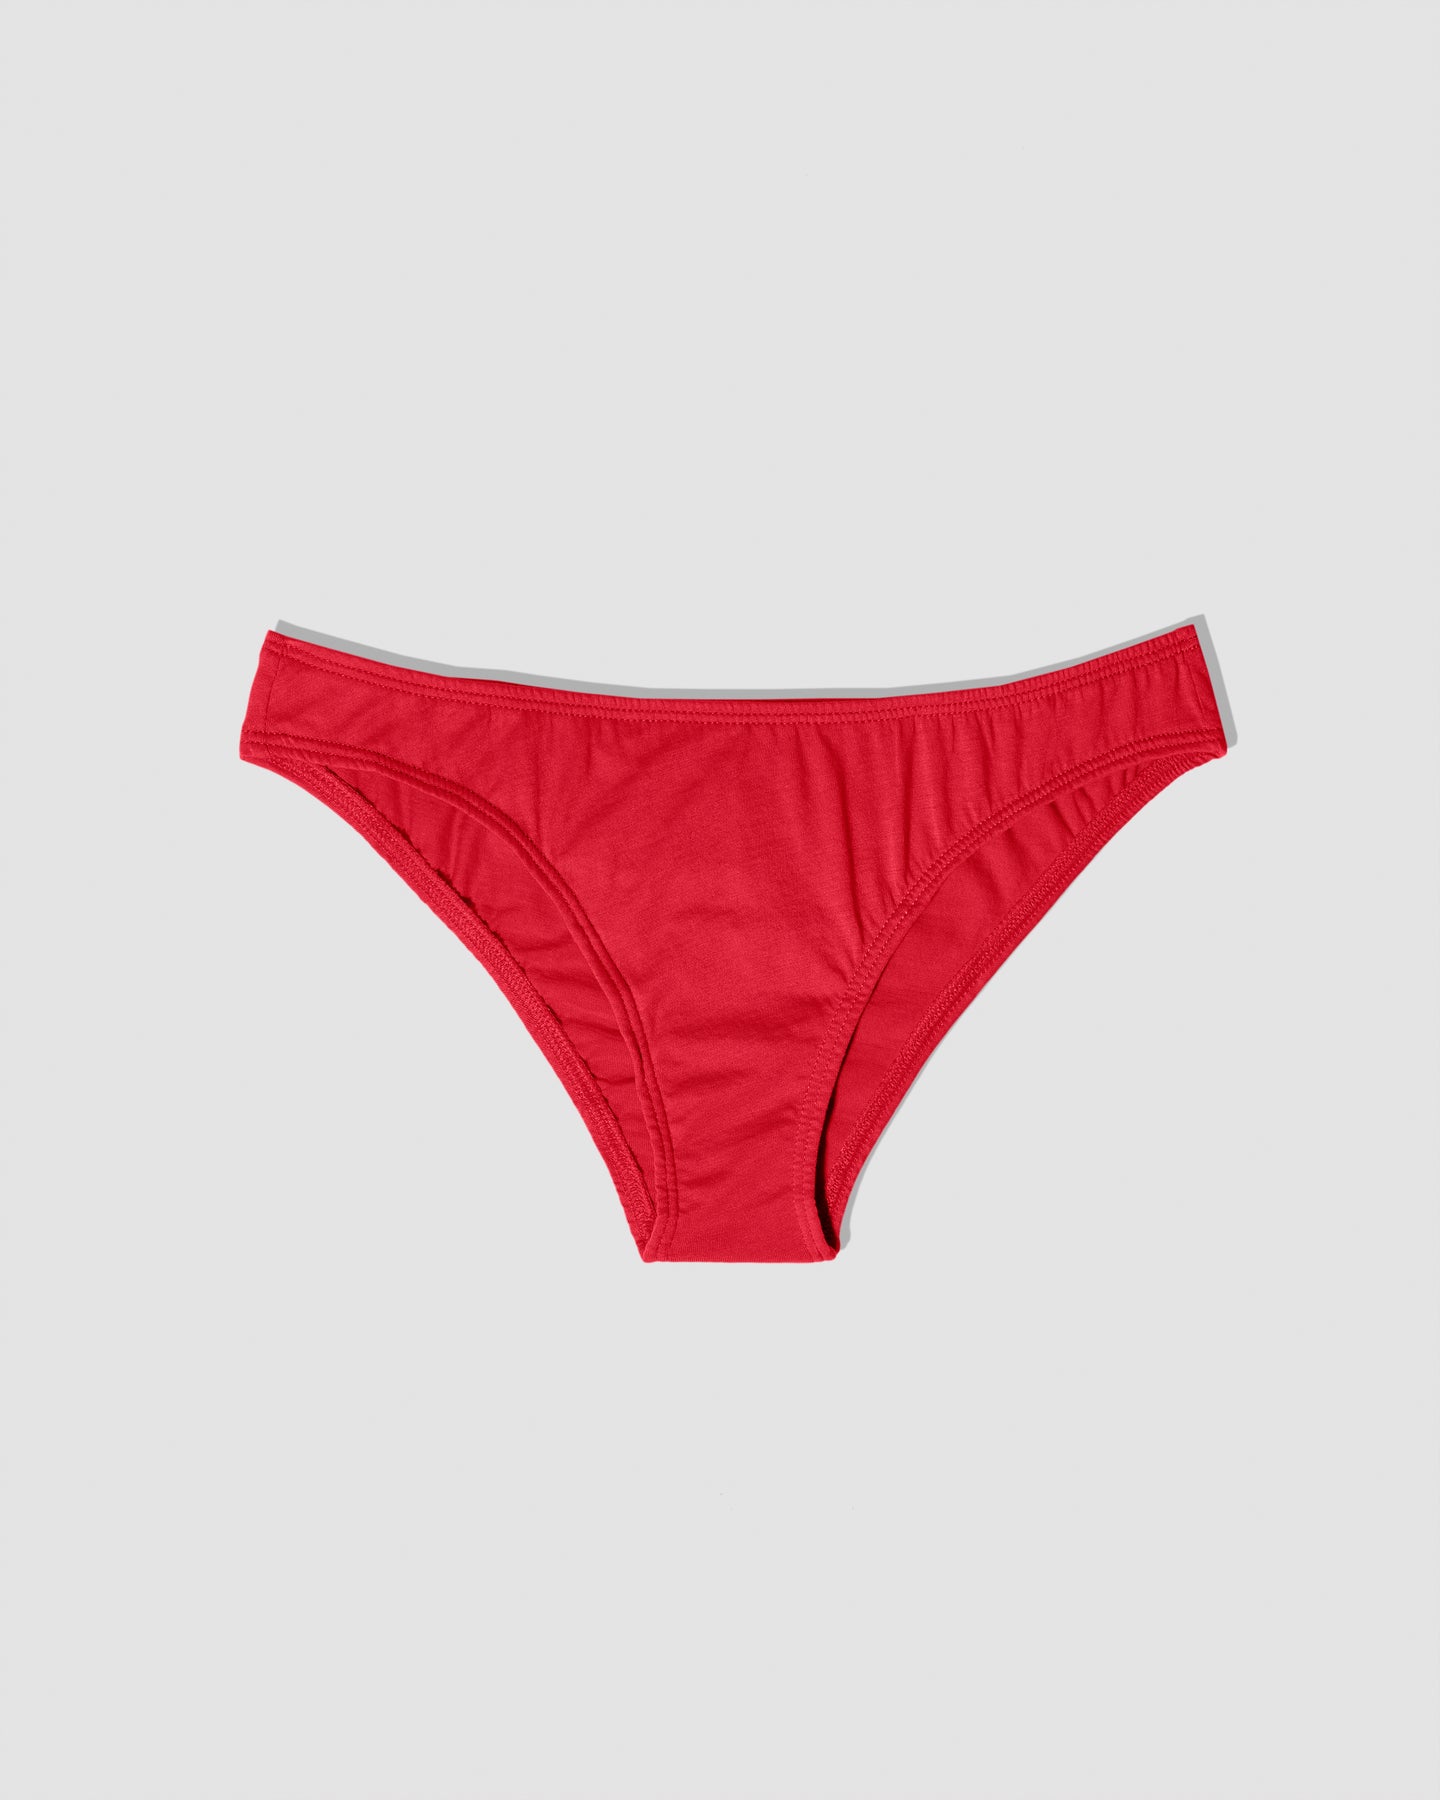 Thong Panties: Over 4,768 Royalty-Free Licensable Stock Vectors